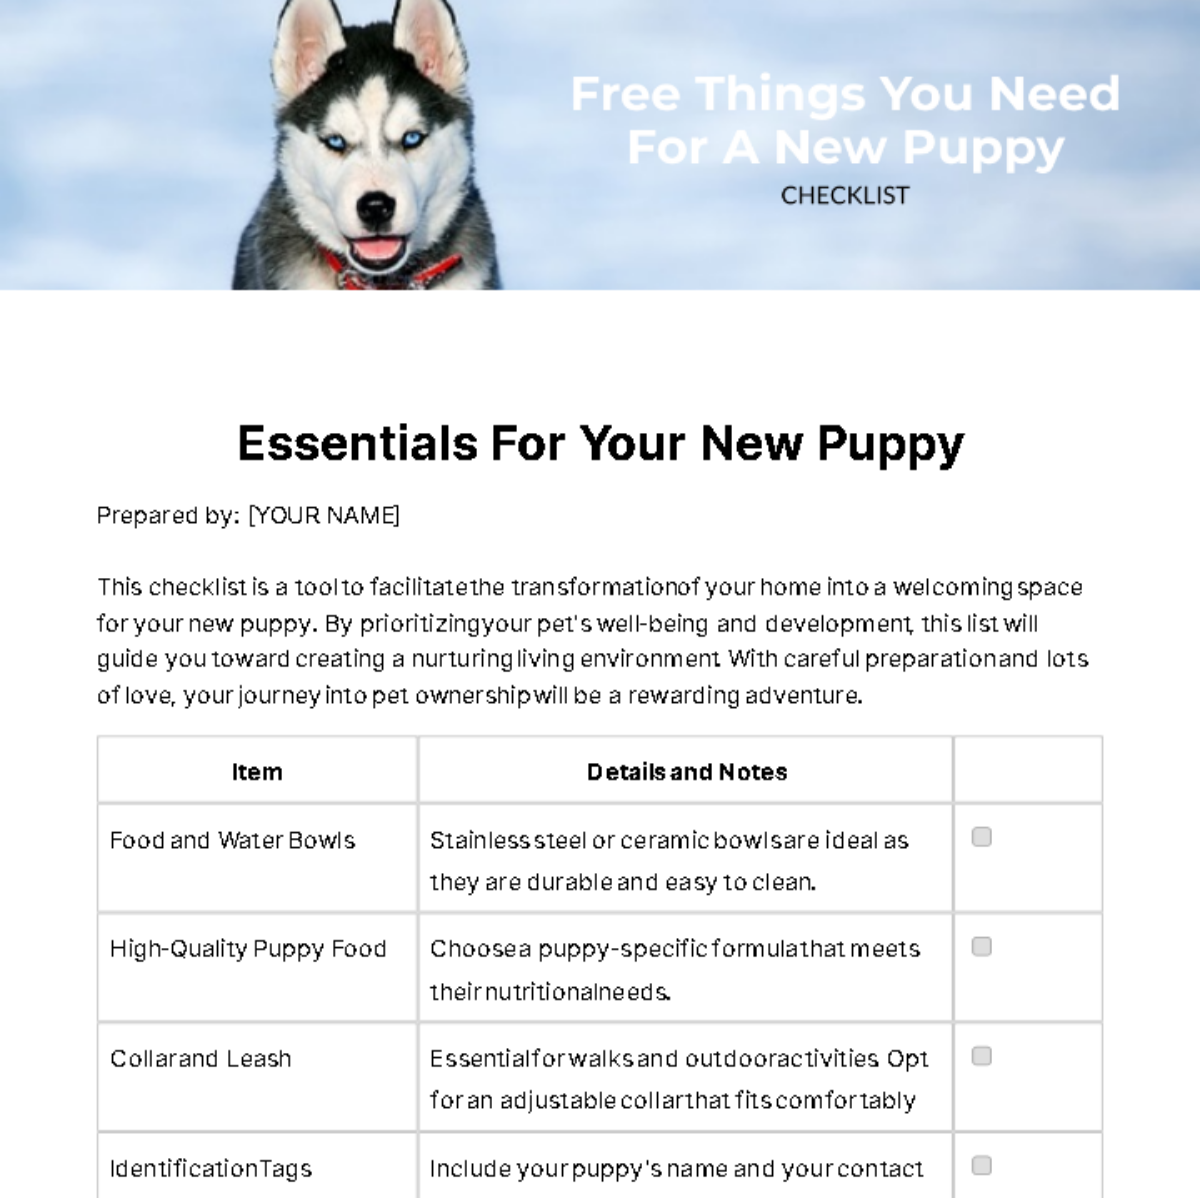 Free Things You Need For A New Puppy Checklist Template